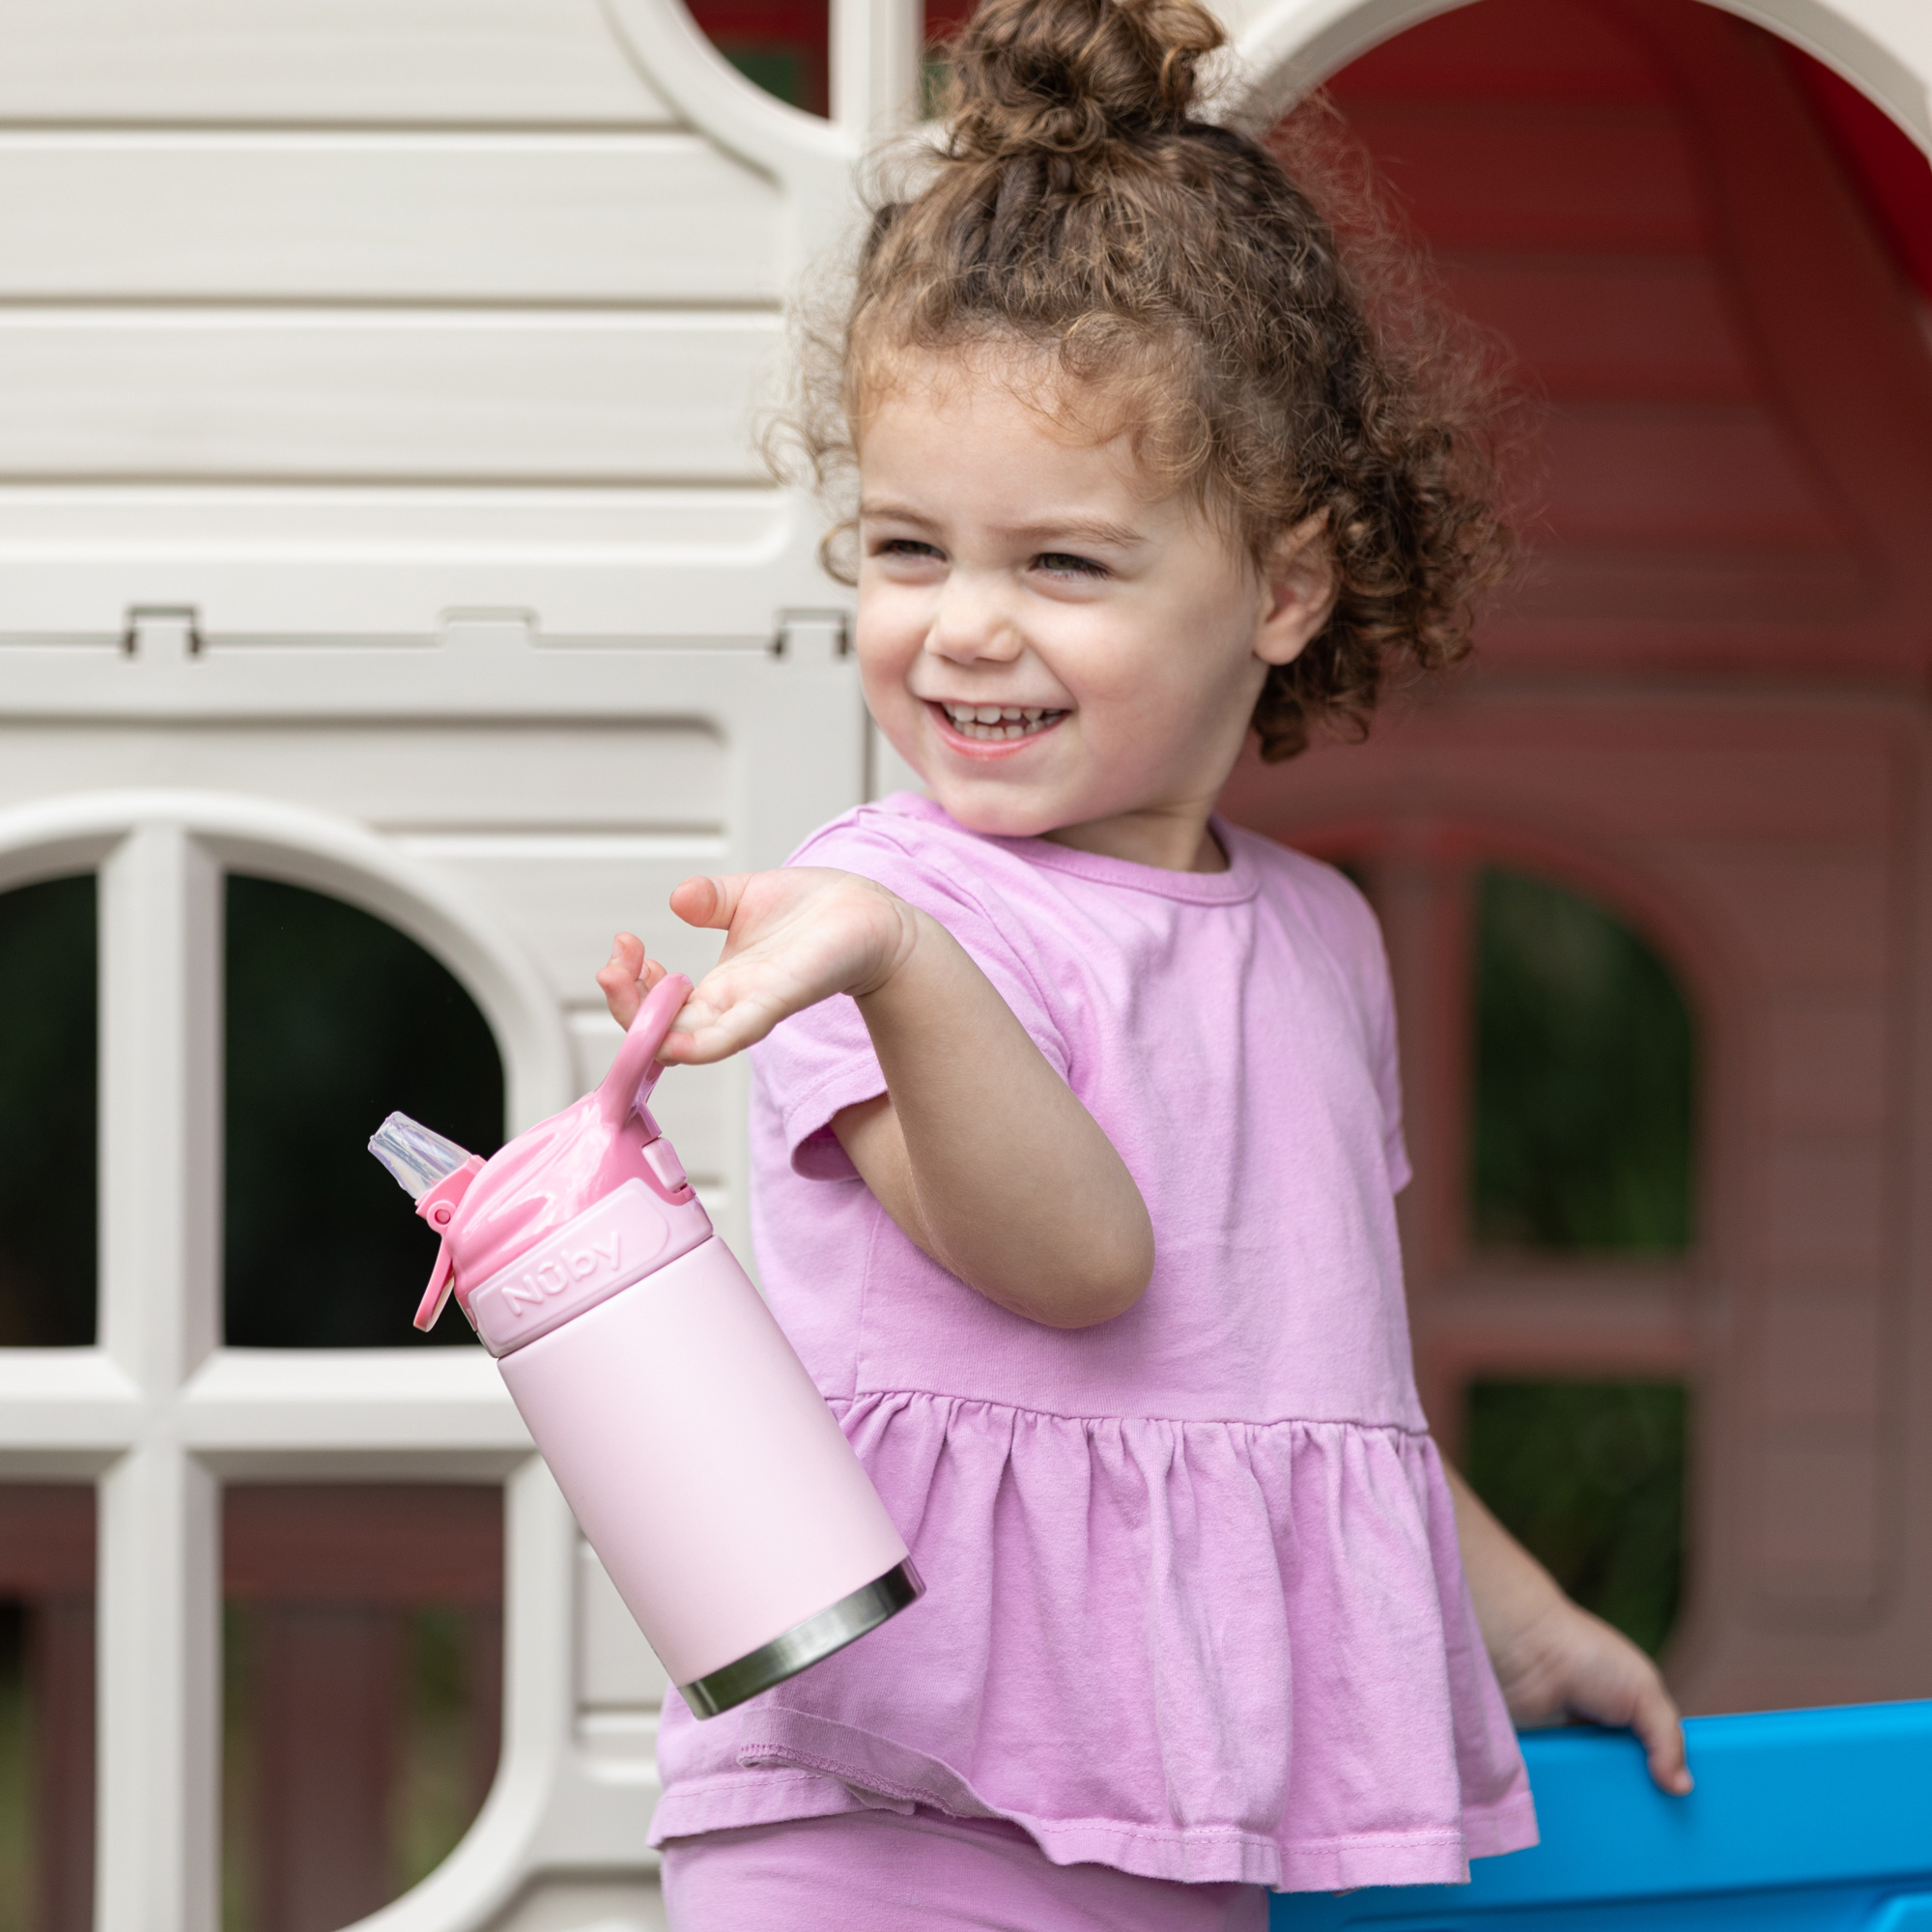 Child with water bottle in the playhouse